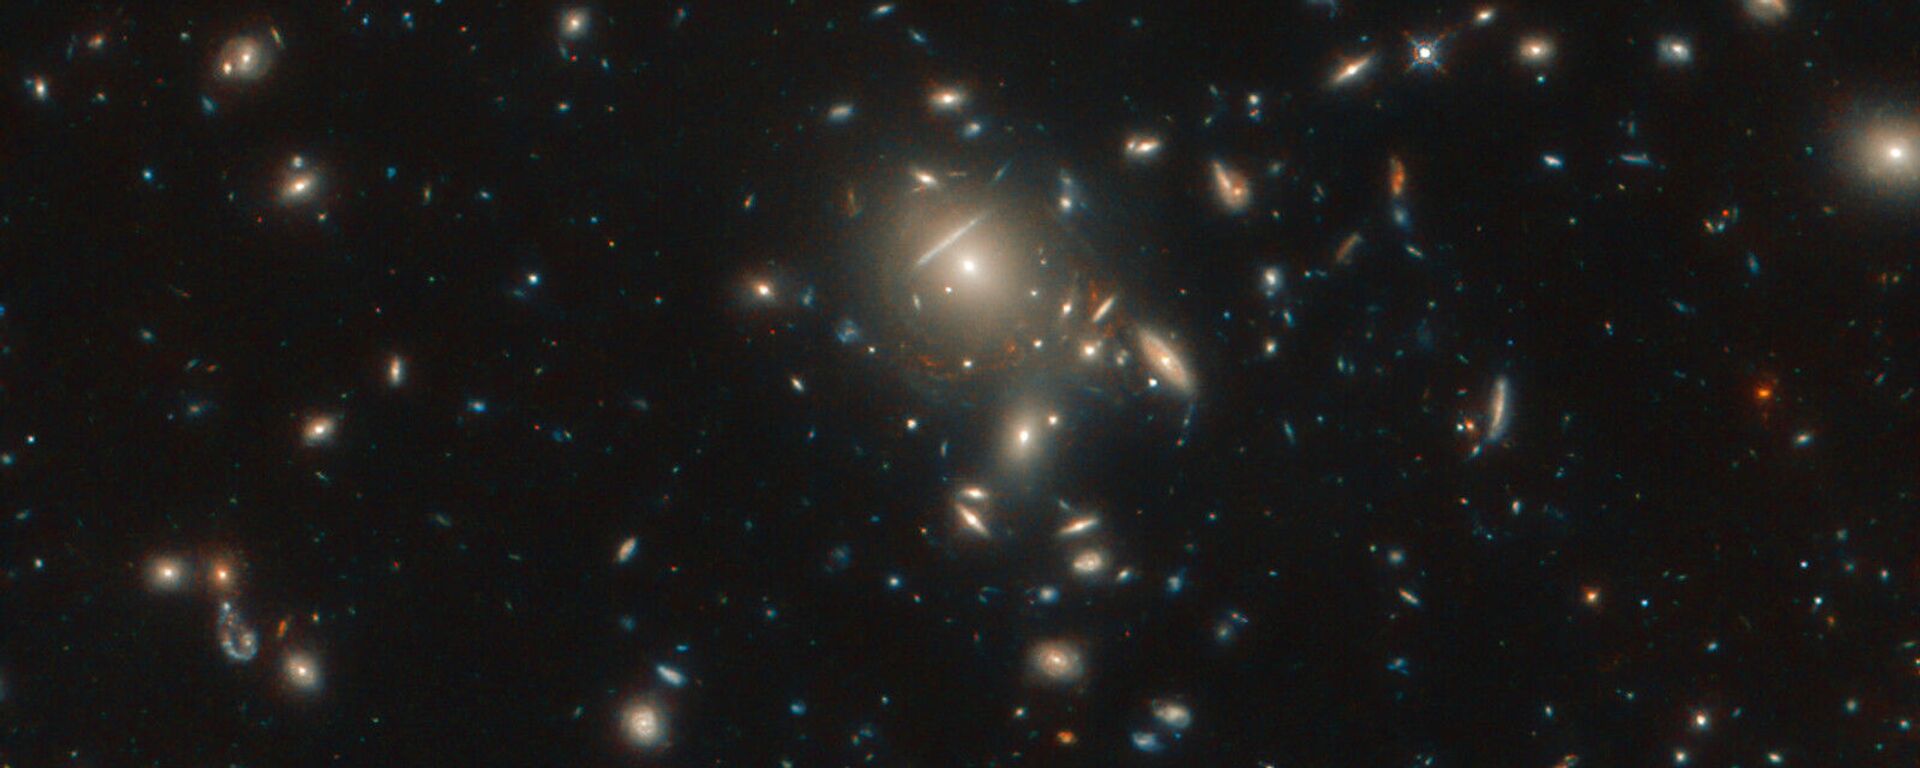 Seen here in incredible detail, thanks to the NASA/ESA Hubble Space Telescope, is the starburst galaxy formally known as PLCK G045.1+61.1. - Sputnik International, 1920, 16.05.2021